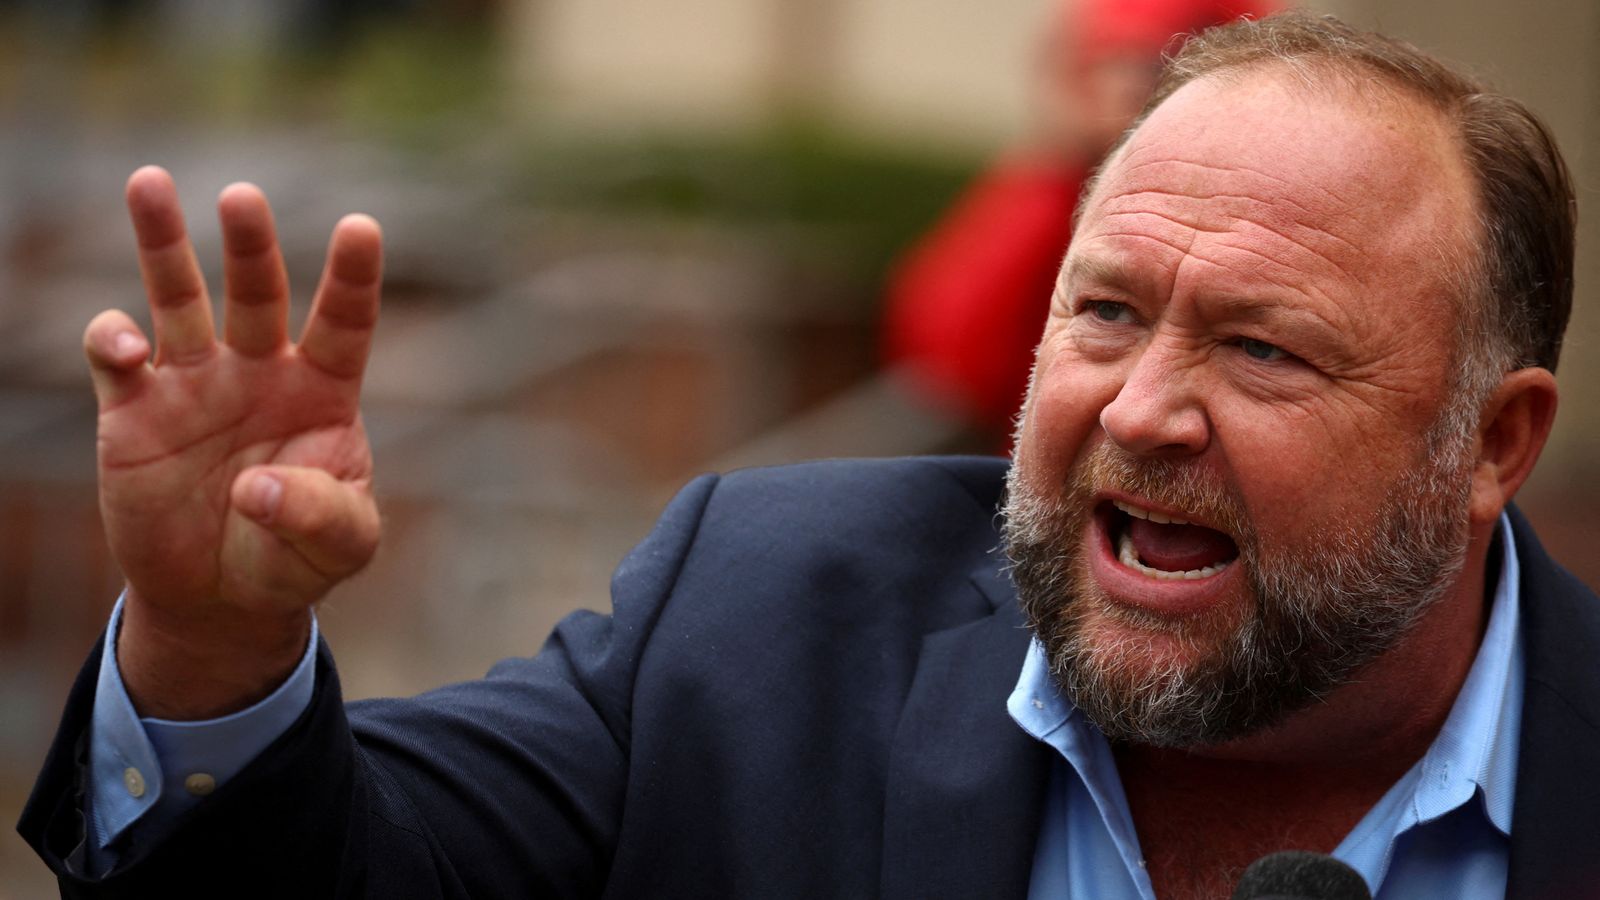 Alex Jones: Conspiracy theorist ordered to pay nearly bn to victims of school shooting over hoax claims